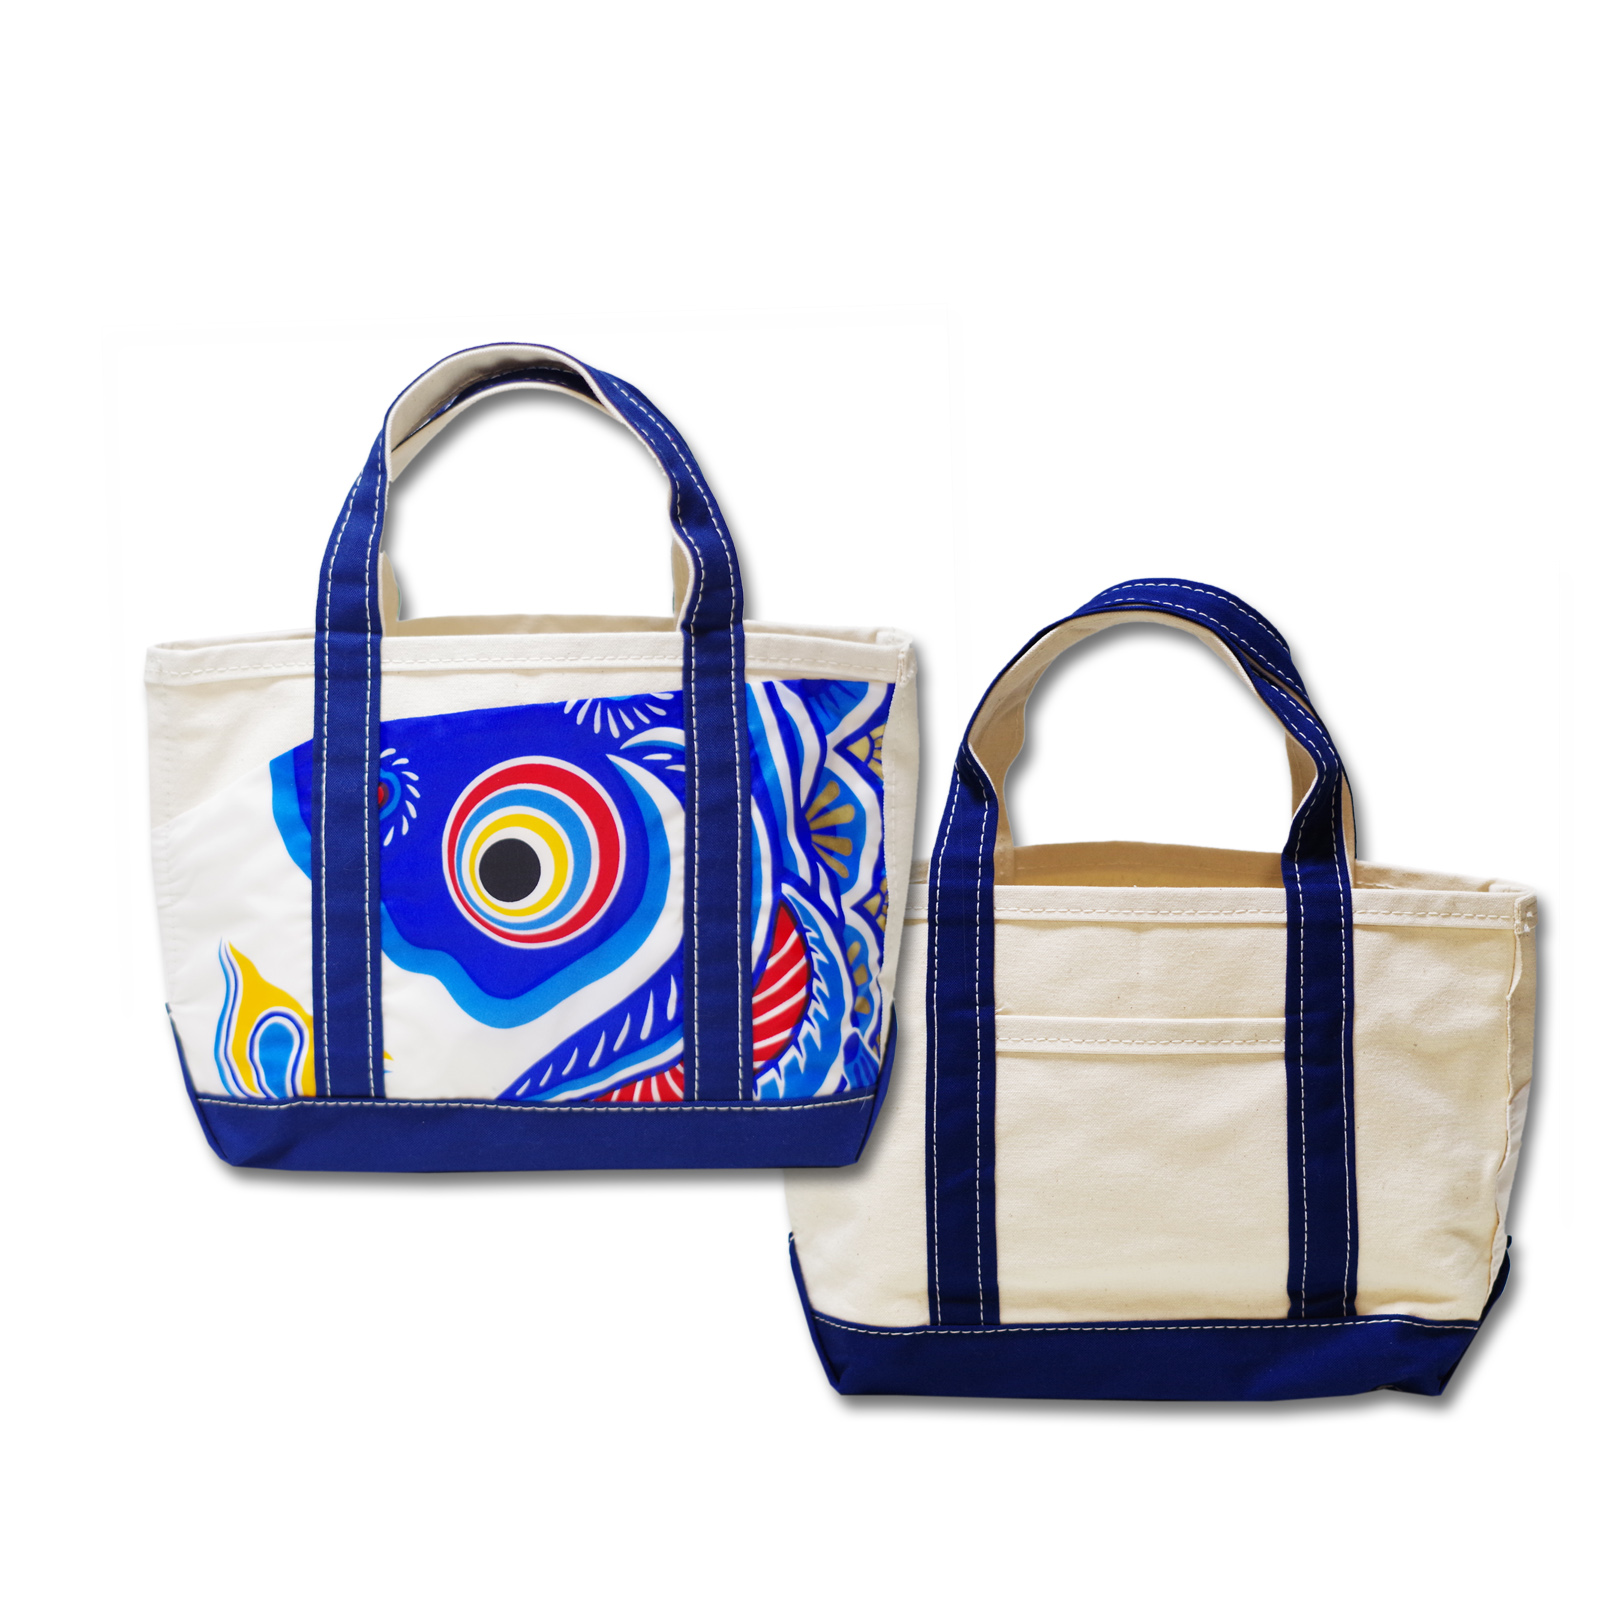 Tote Bag Blue Small Size left Facing